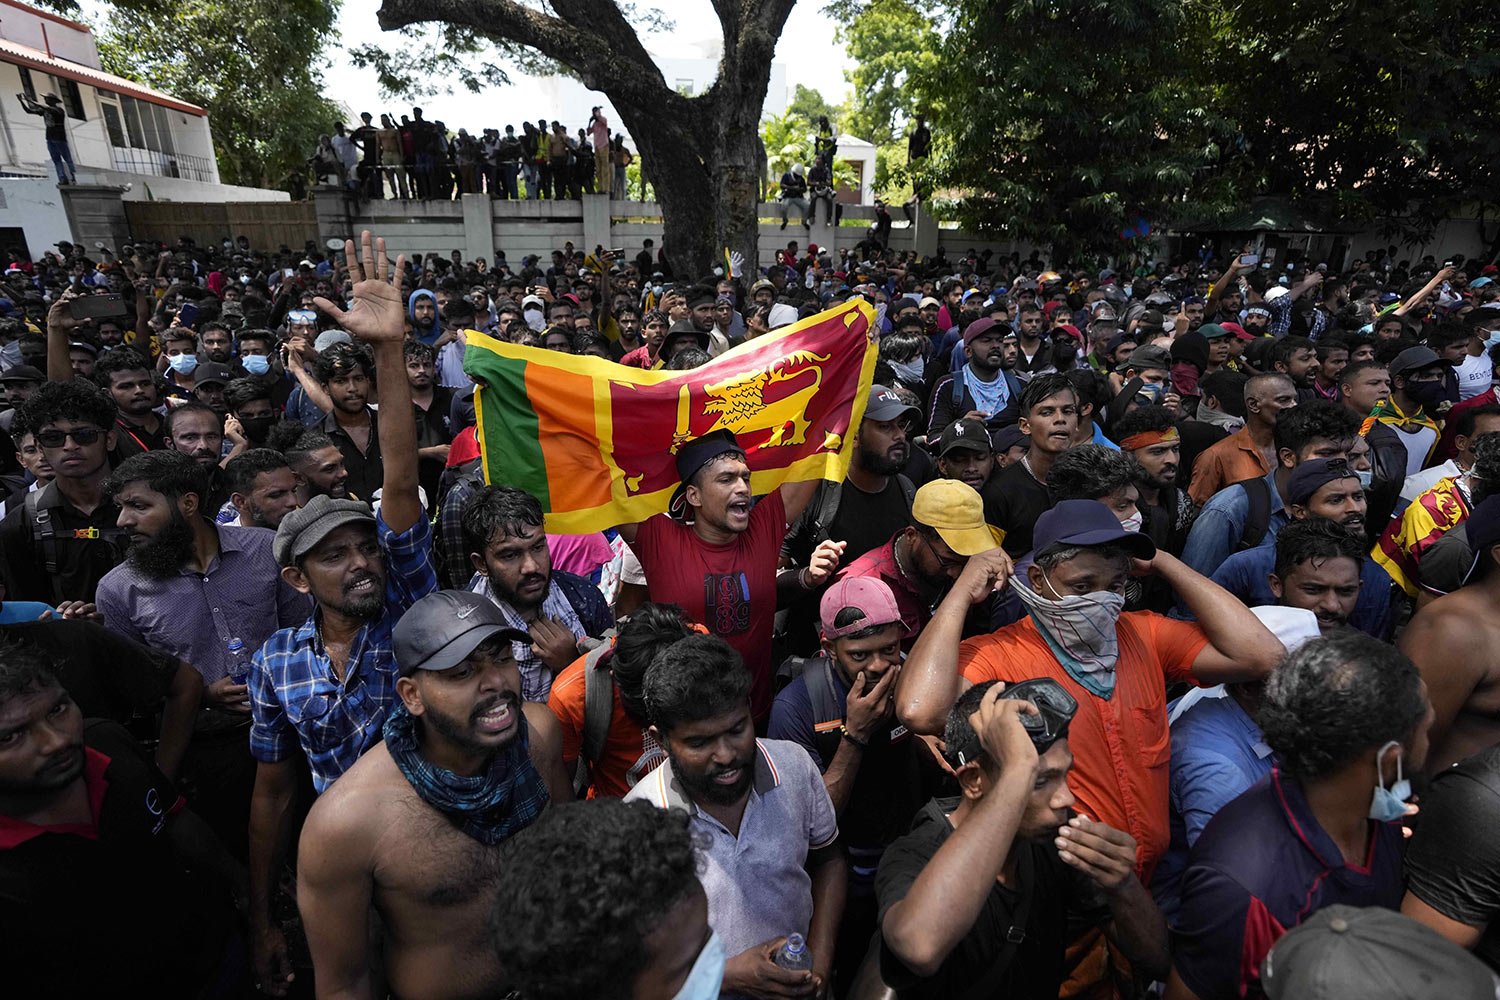  Protesters storm the office compound of Prime Minister Ranil Wickremesinghe, demanding he resign after President Gotabaya Rajapaksa fled the country amid an economic crisis, in Colombo, Sri Lanka, July 13, 2022. (AP Photo/Eranga Jayawardena) 